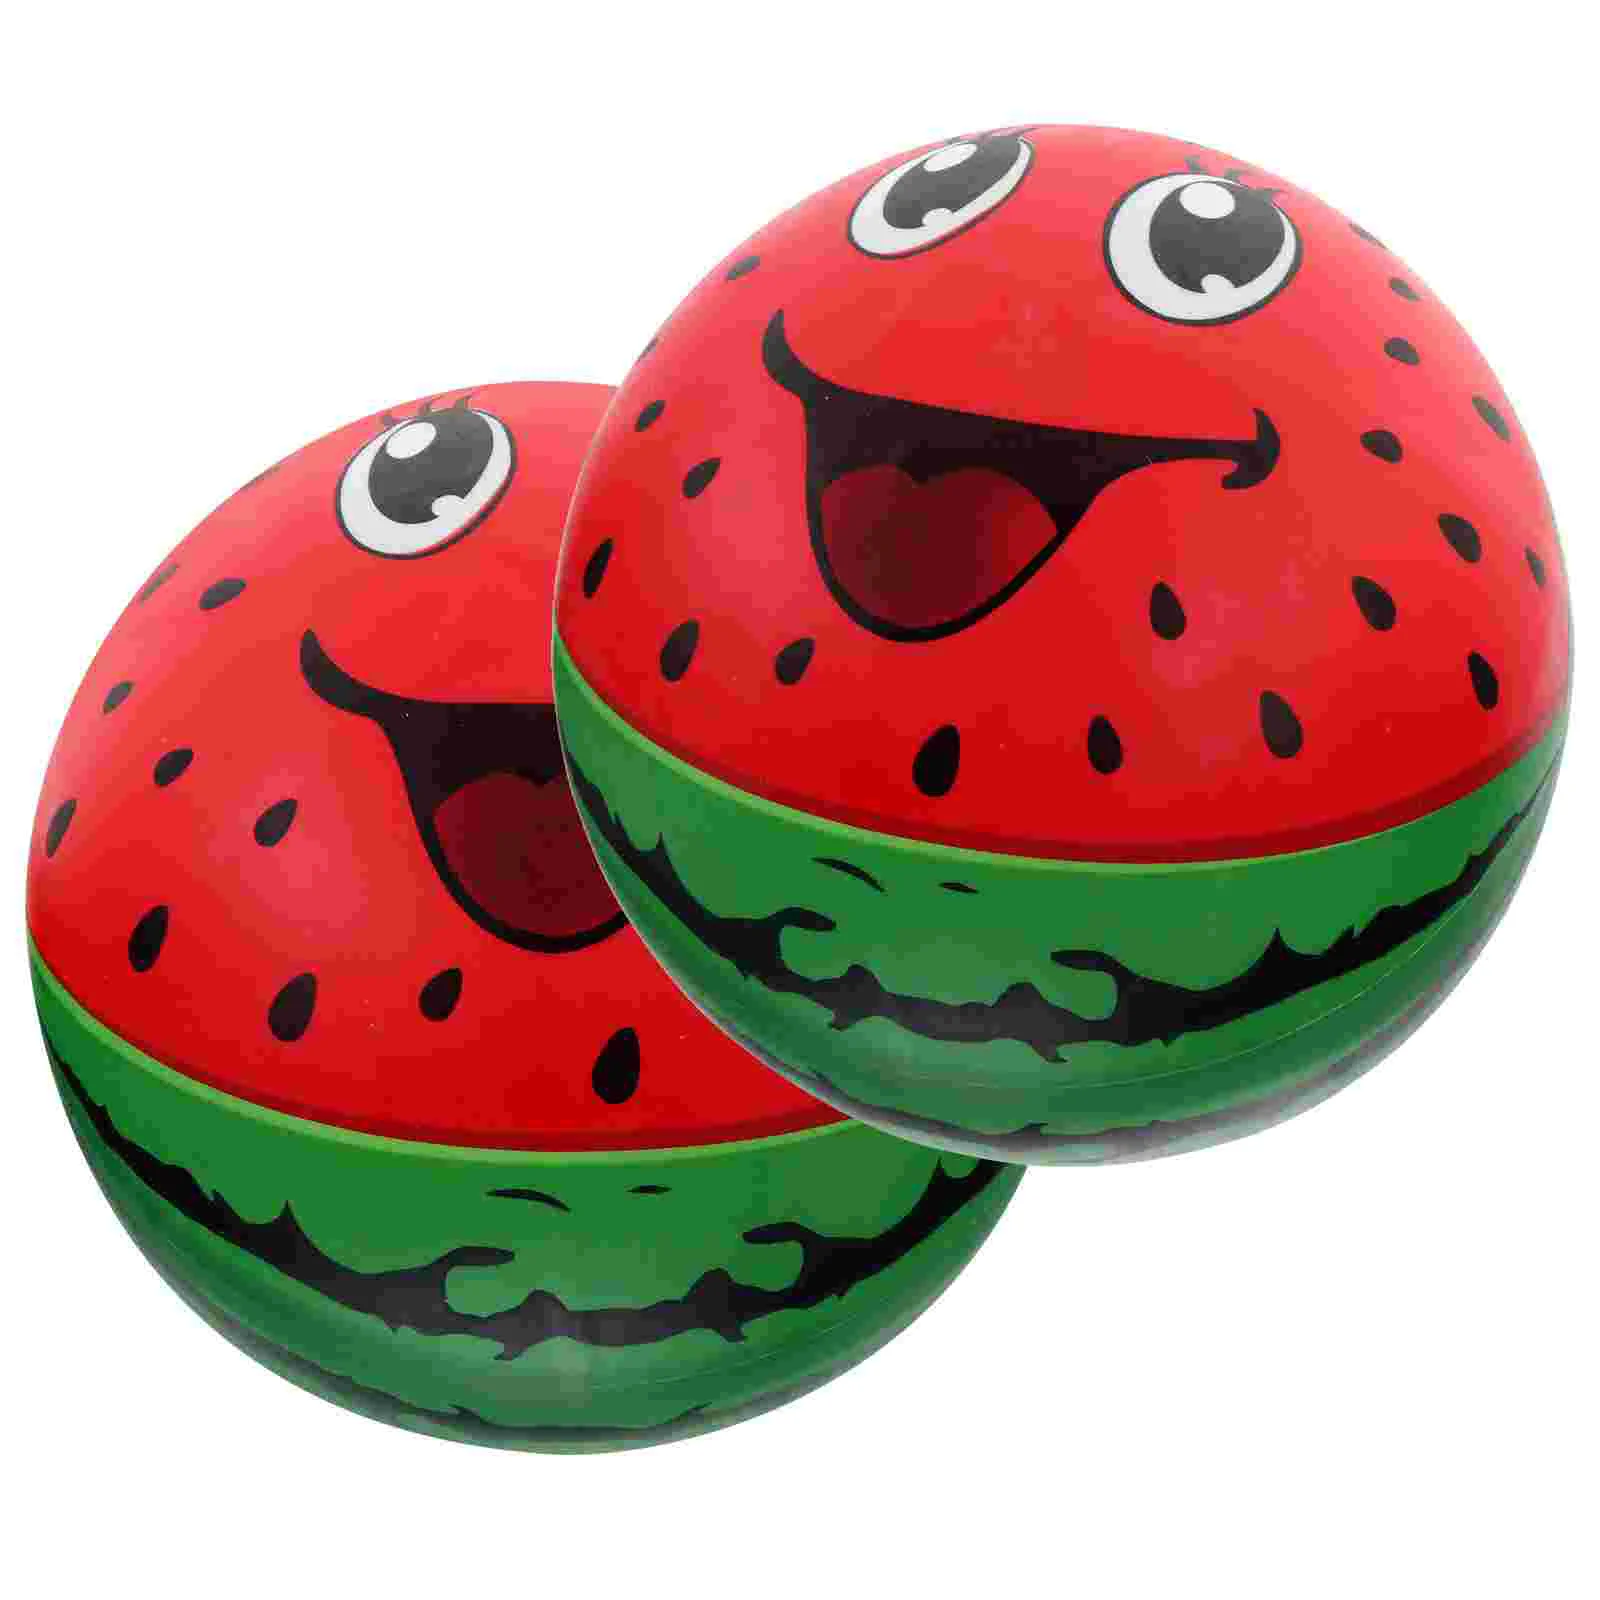 

2 Pcs Billiards Inflatable Ball Toy Watermelon Balls Pool Kiddie Small Beach Swimming Blowup Toys